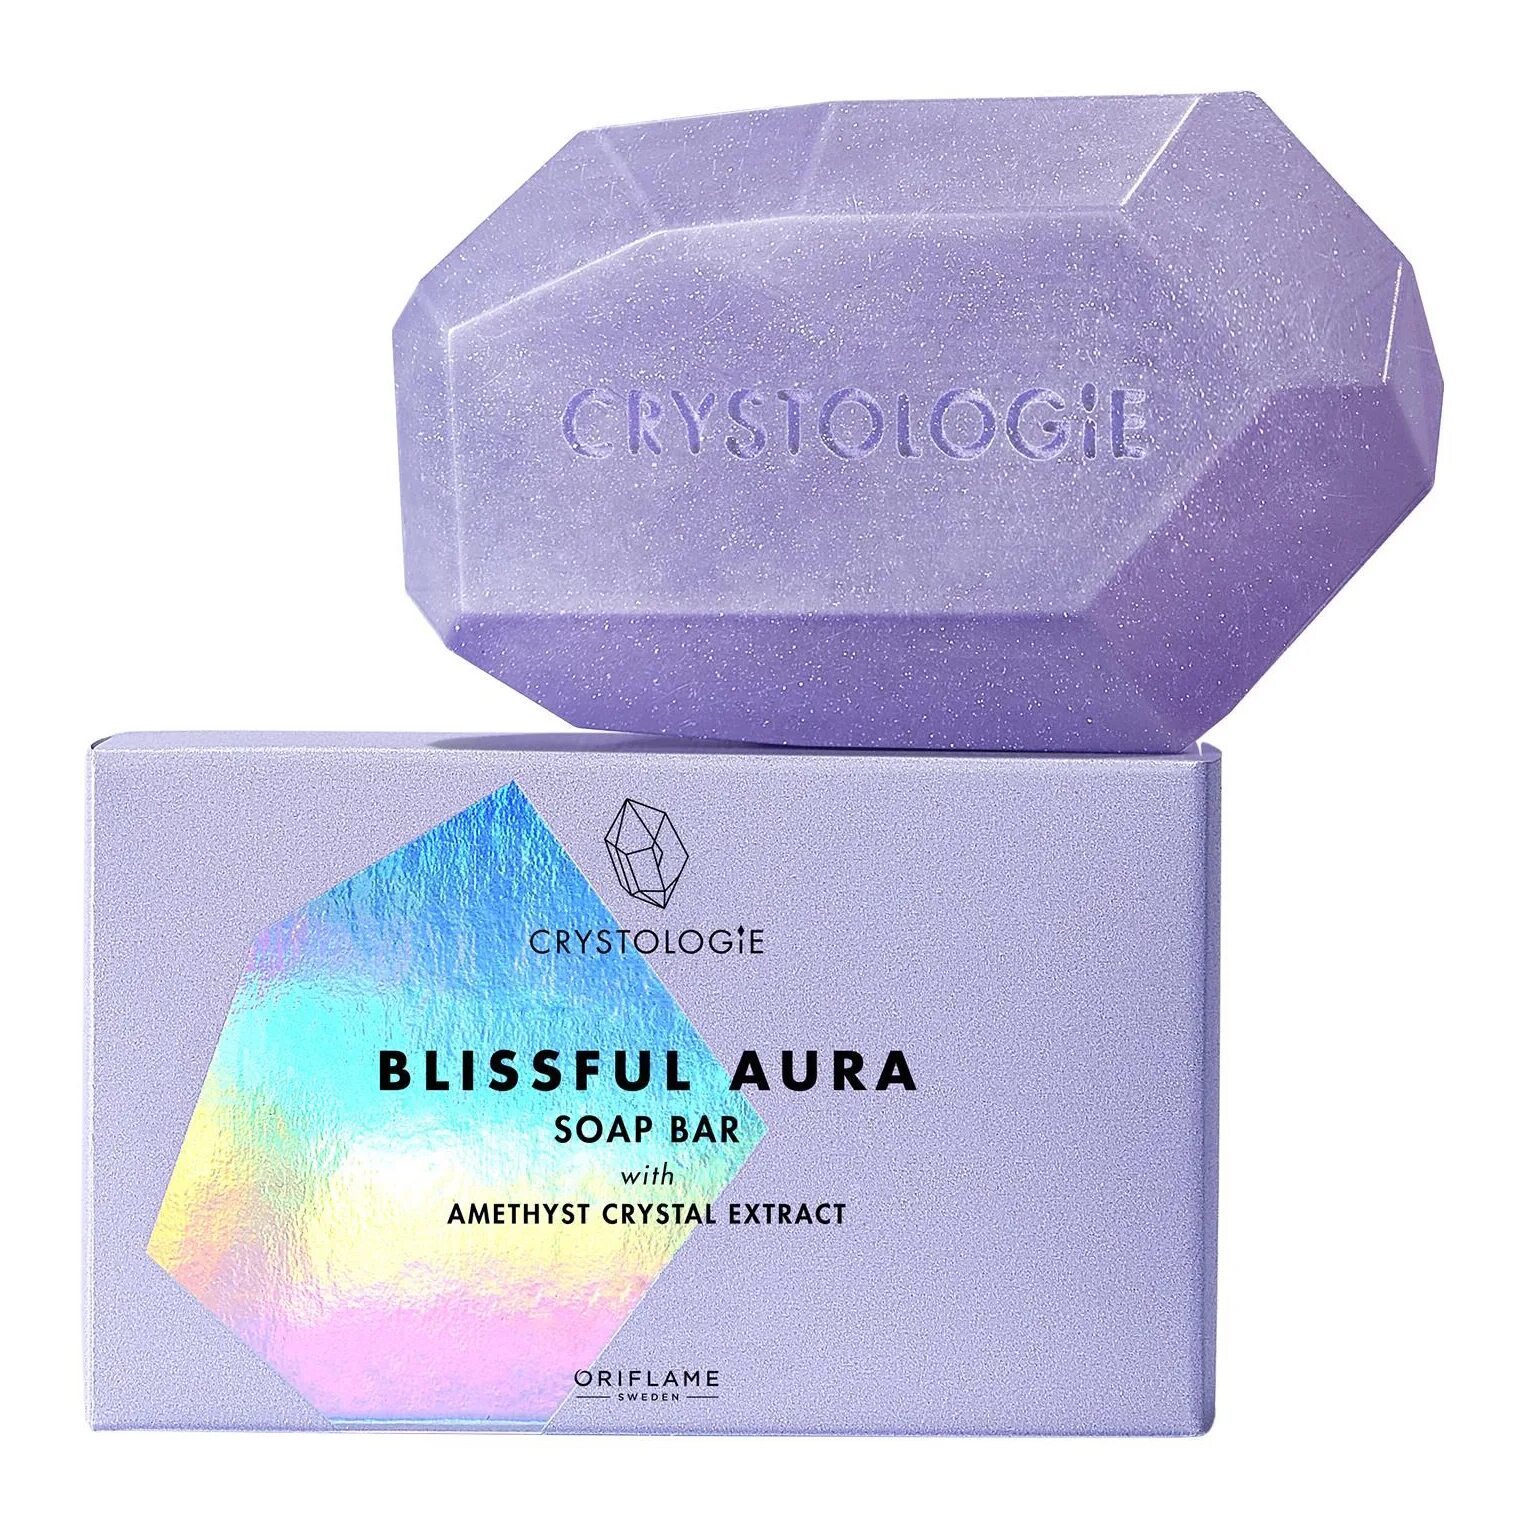 Crystal мыло. Мыло blissful Aura. Мыло Oriflame. Мыло аметист. Мыло Кристалл.